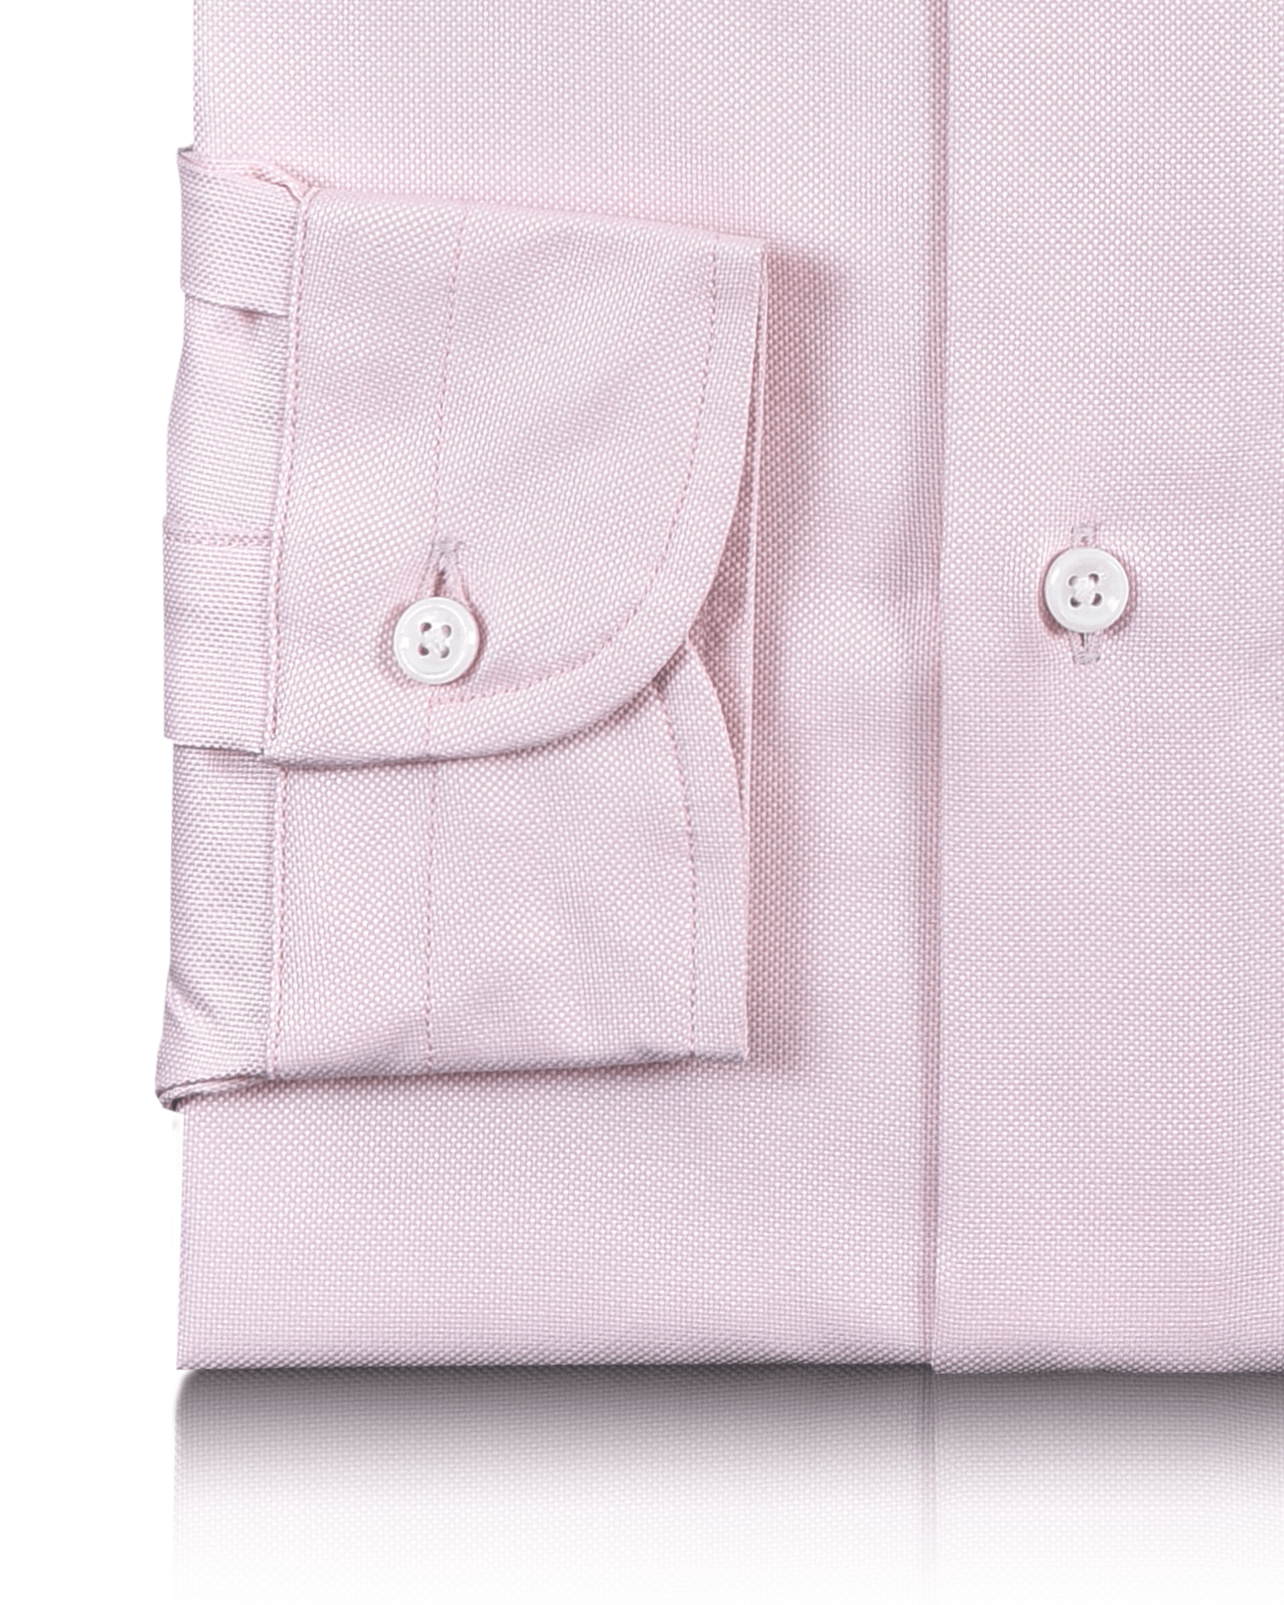 Cuff of the custom oxford shirt for men by Luxire in baby pink royal